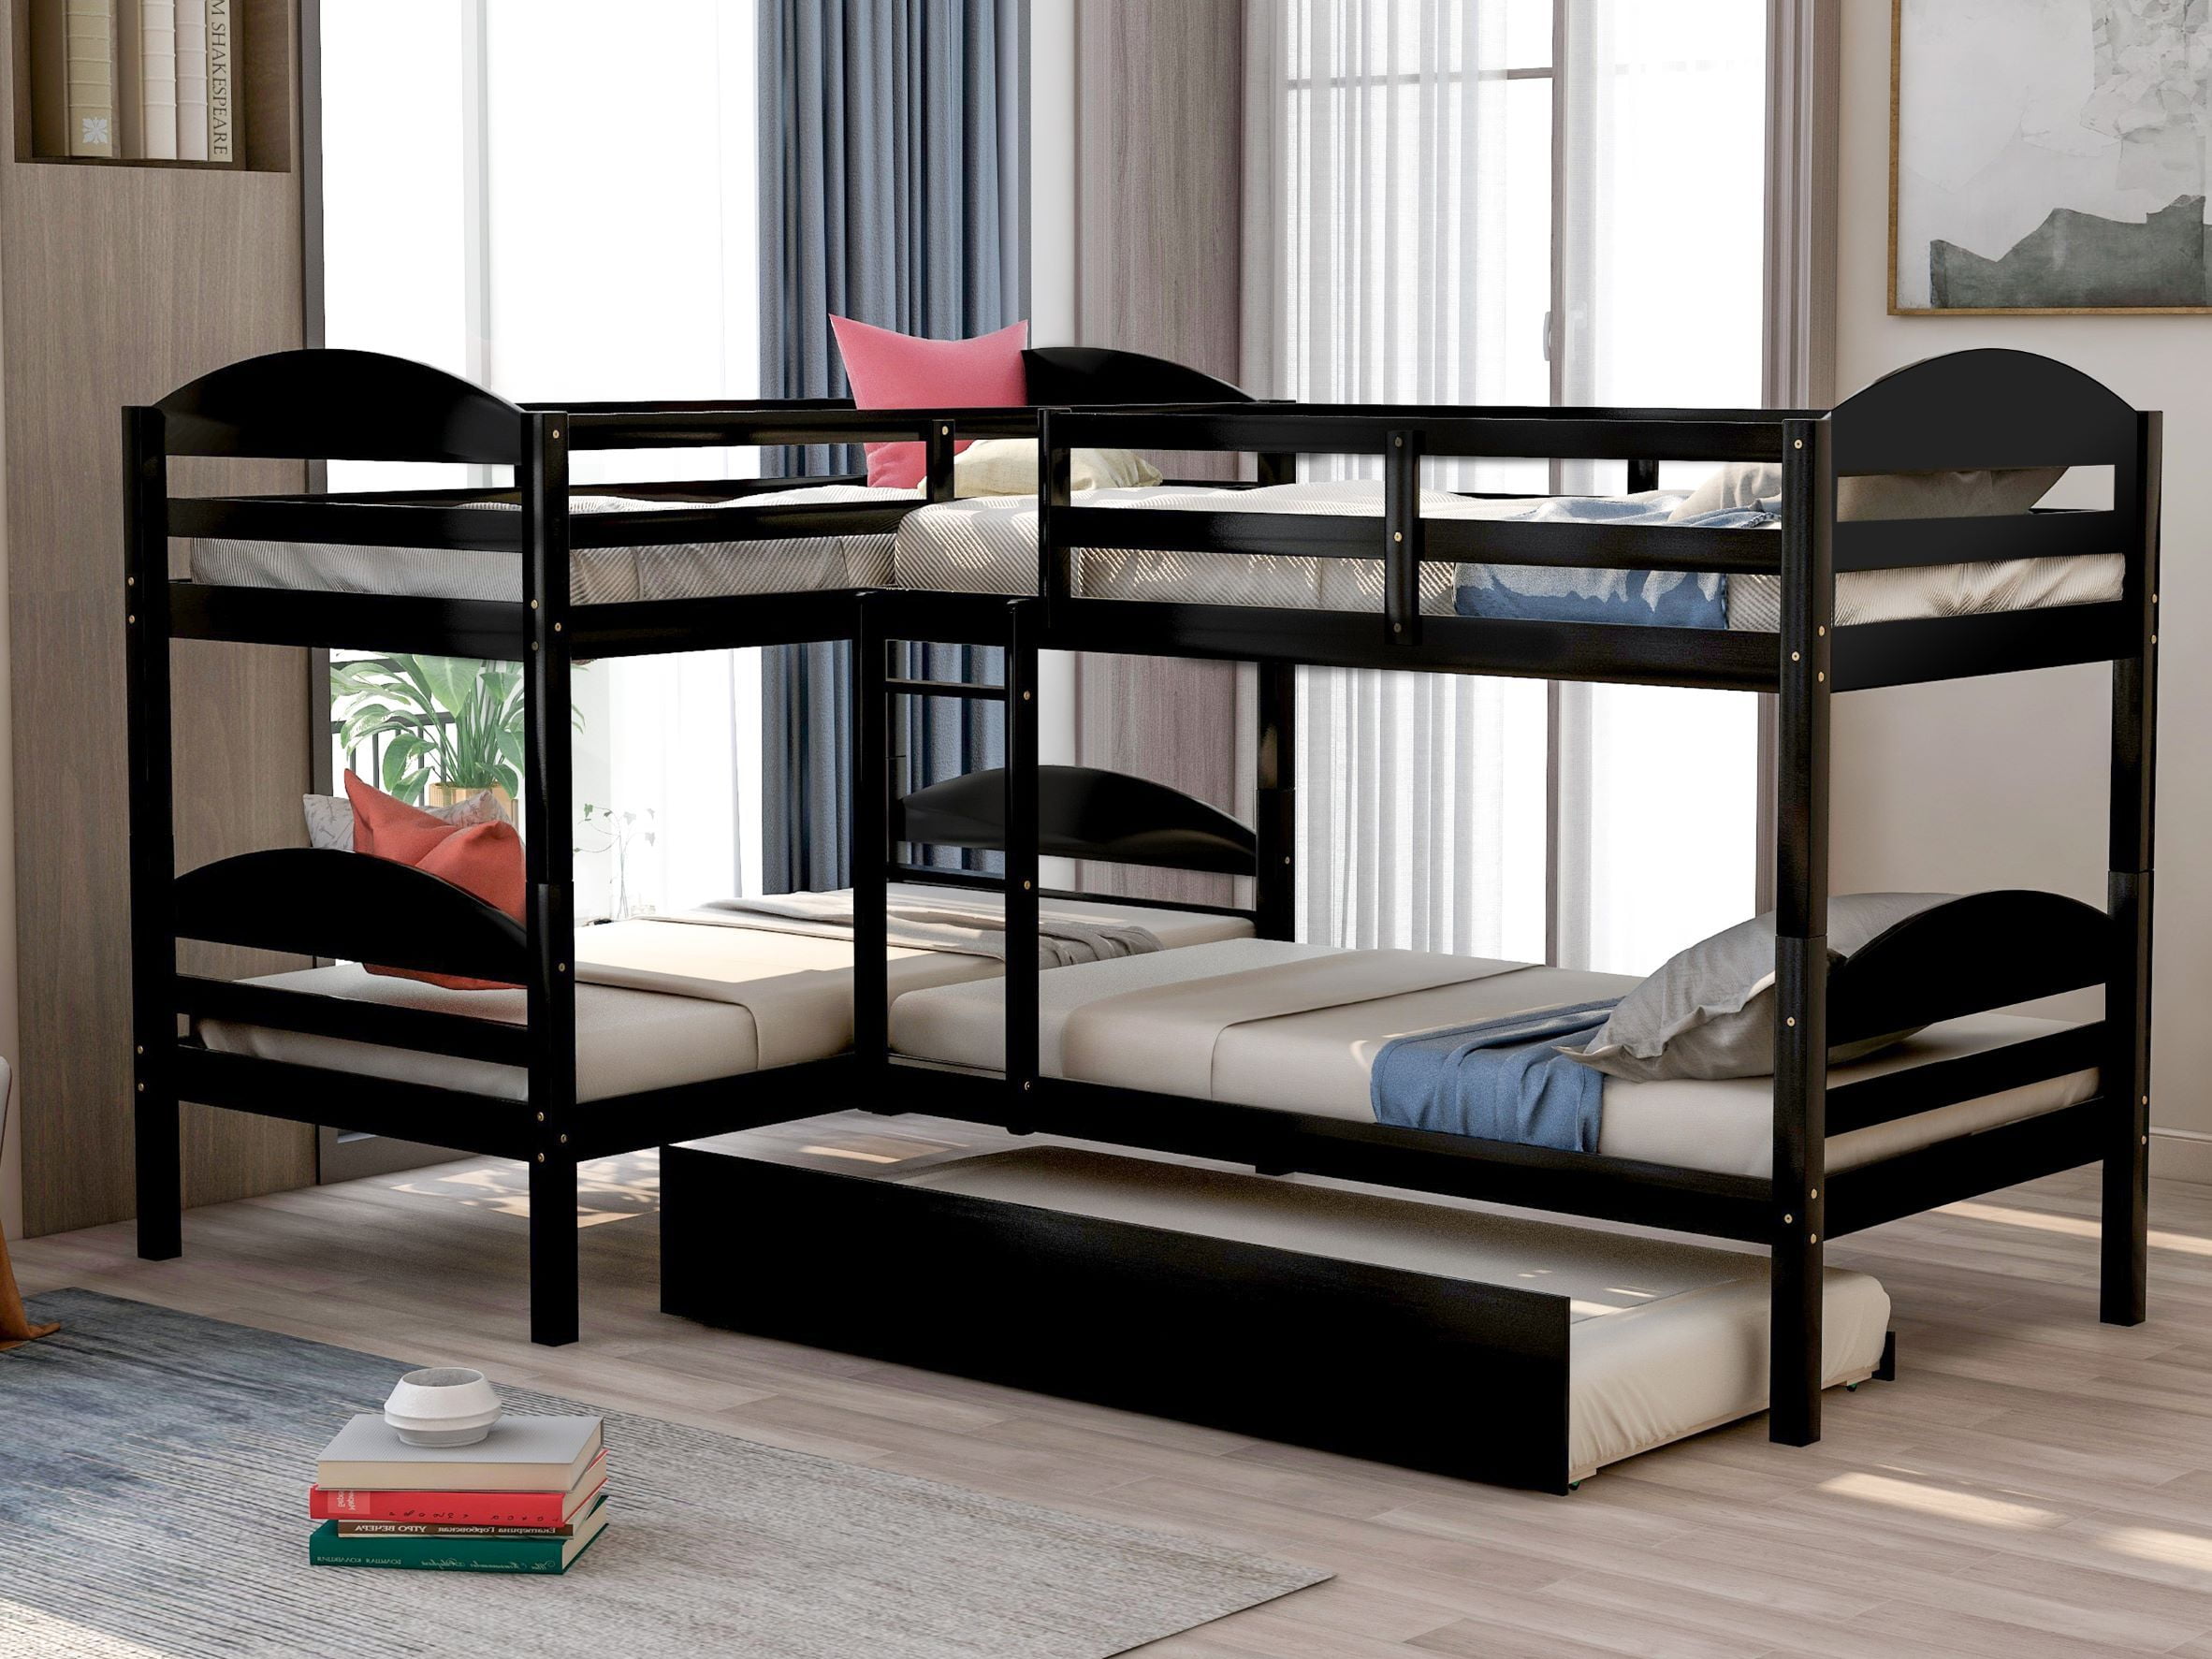 Anysun Bunk Bed With Trundle Twin Over Twin Bunk Beds With Ladder